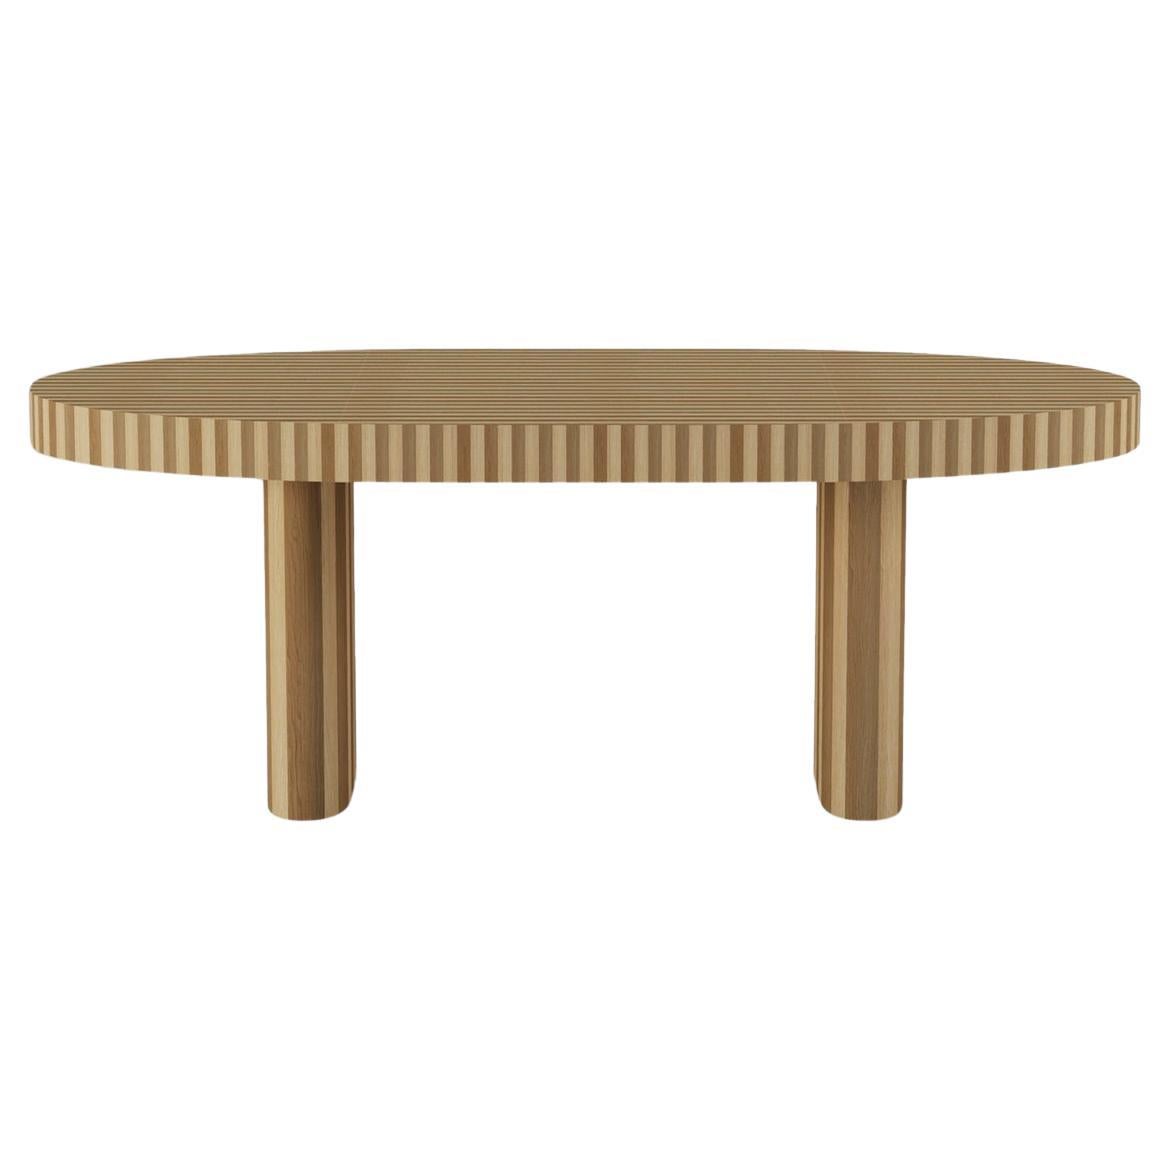 DOOQ Nusa Oval Dining Table Organic Modern in Natural Wood Marquetery 